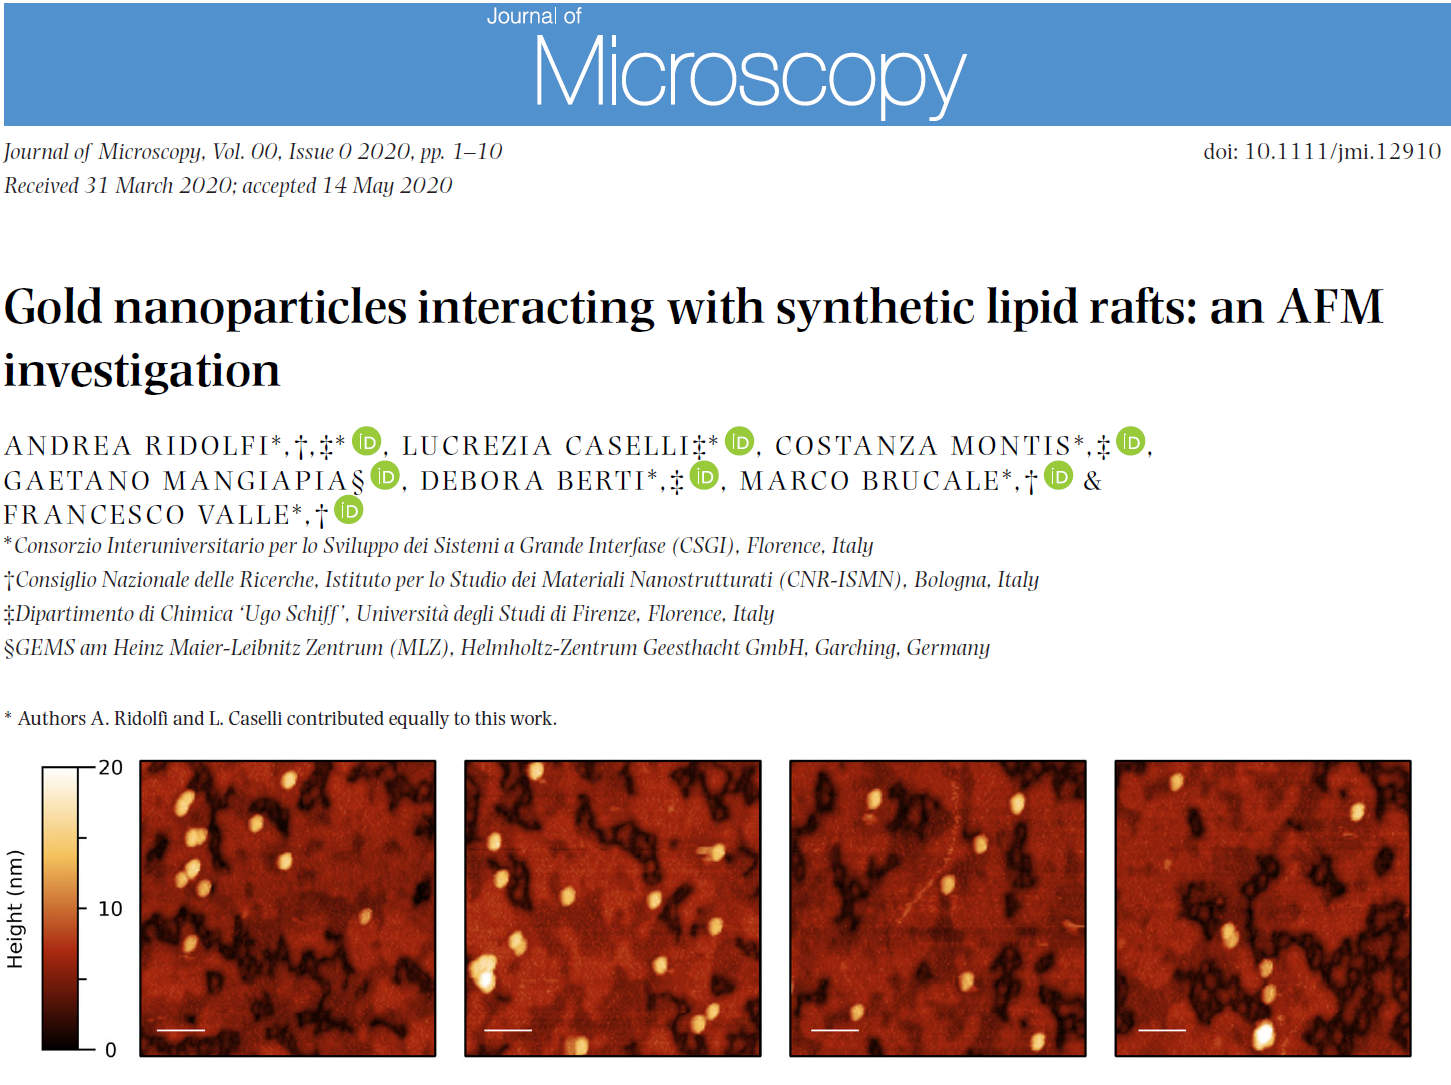 Gold nanoparticles interacting with synthetic lipid rafts: an AFM investigation